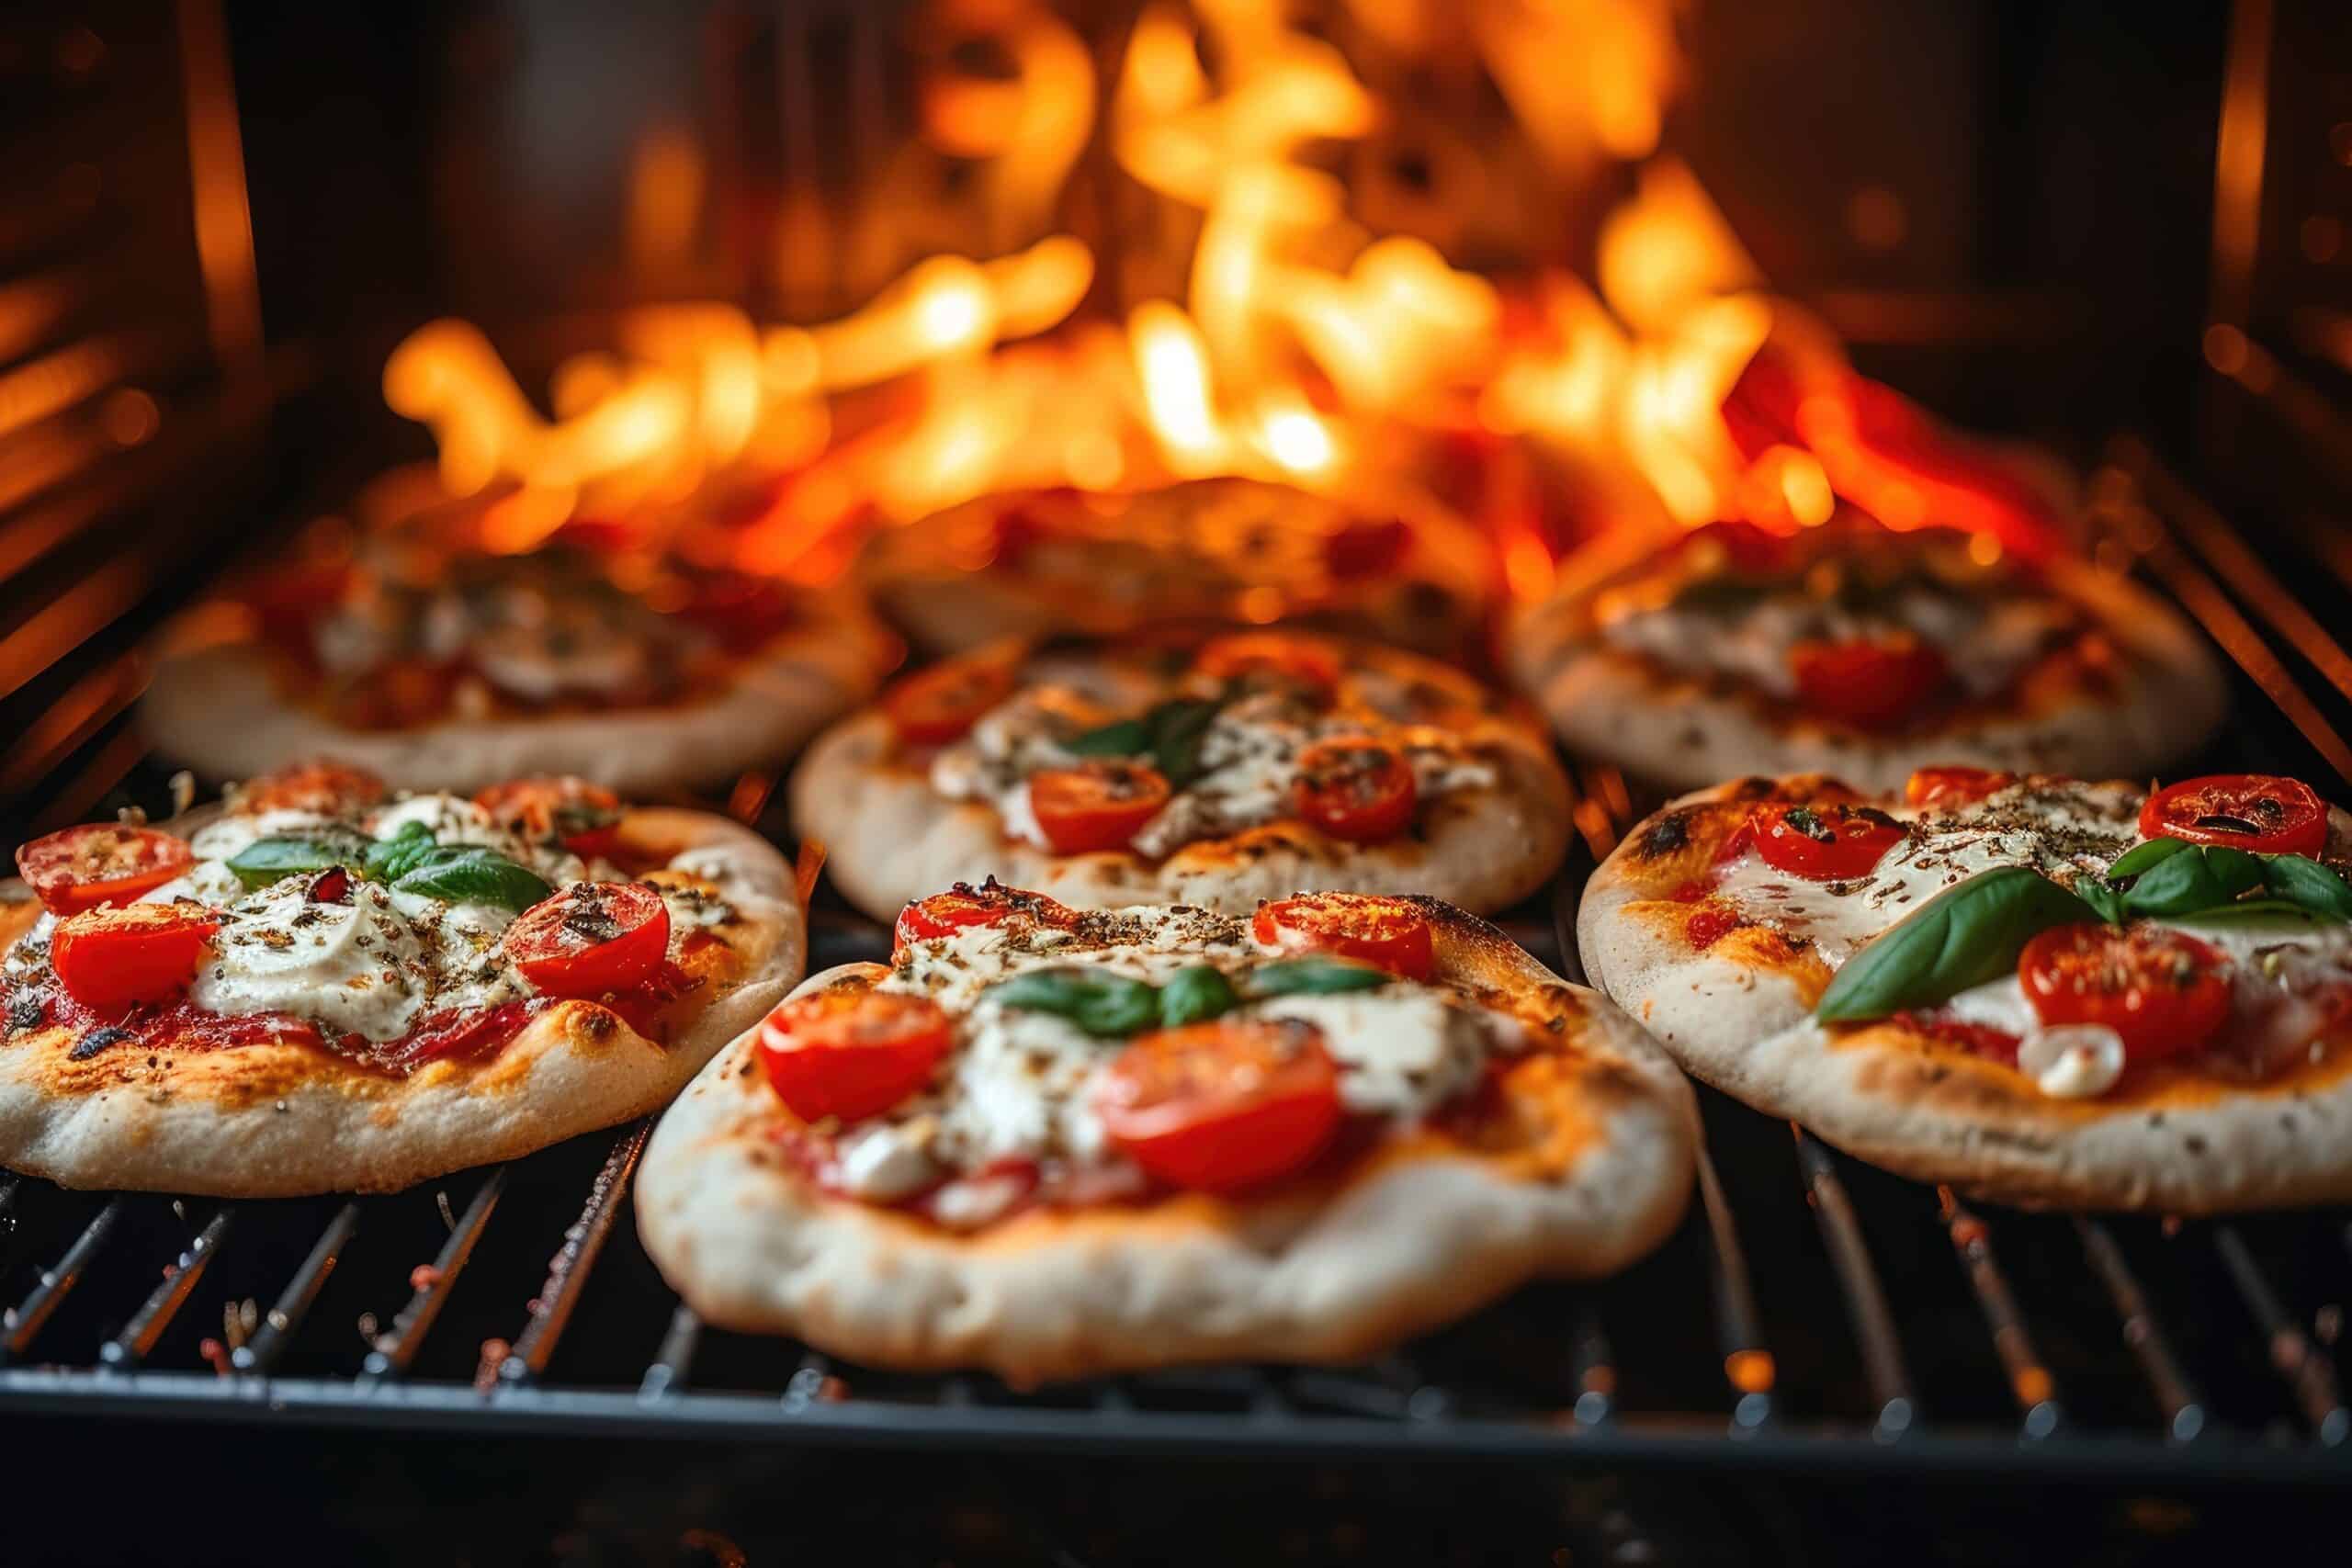 www.appr.com : How To Charcoal Grill Pizza?